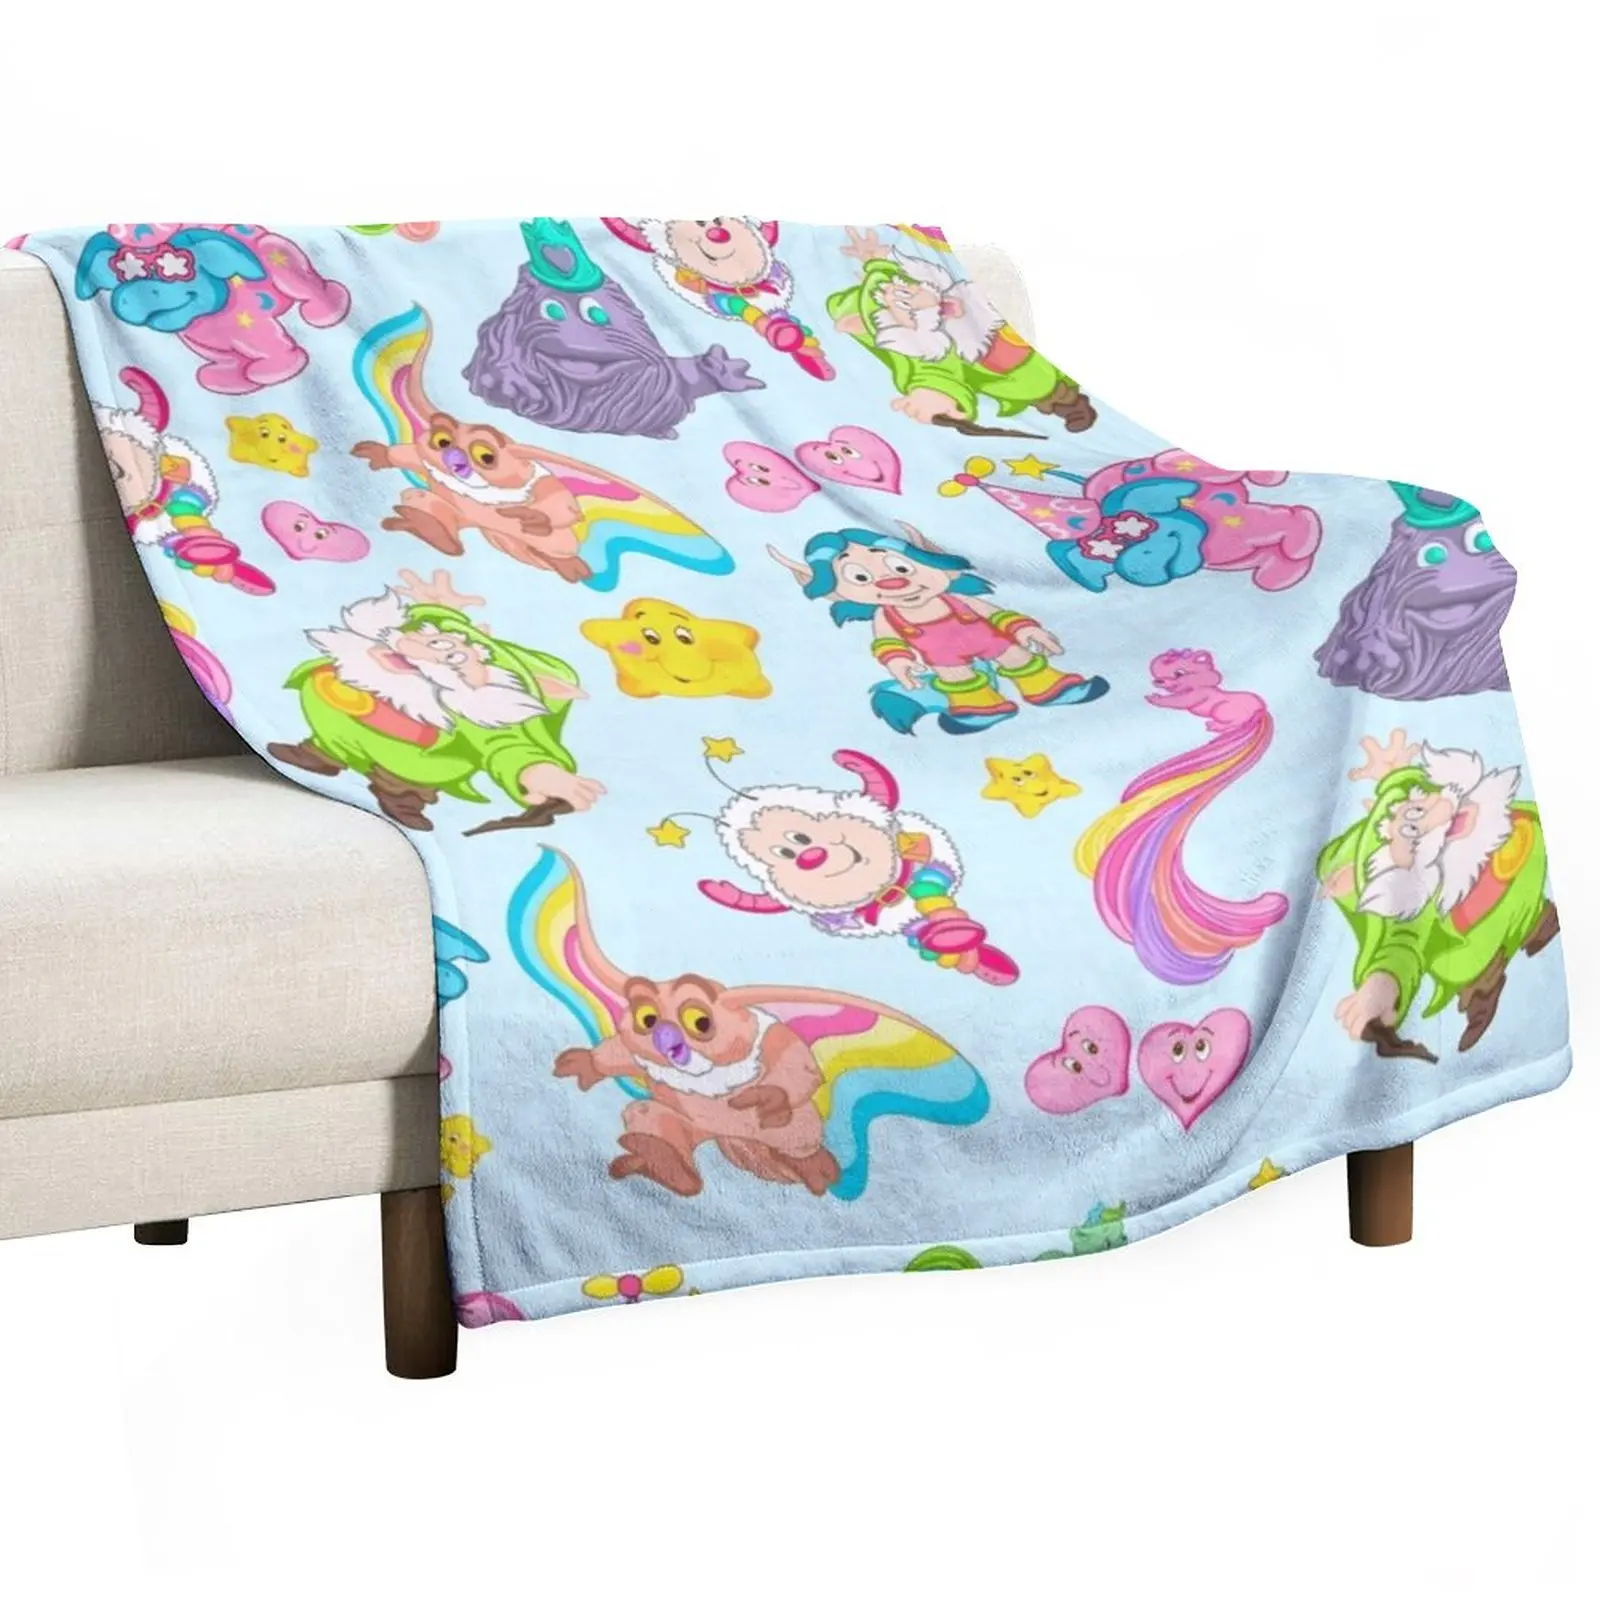 

Supporting Cartoon Characters of the 80s Throw Blanket Luxury Brand Blanket sofa bed Hairy Blankets